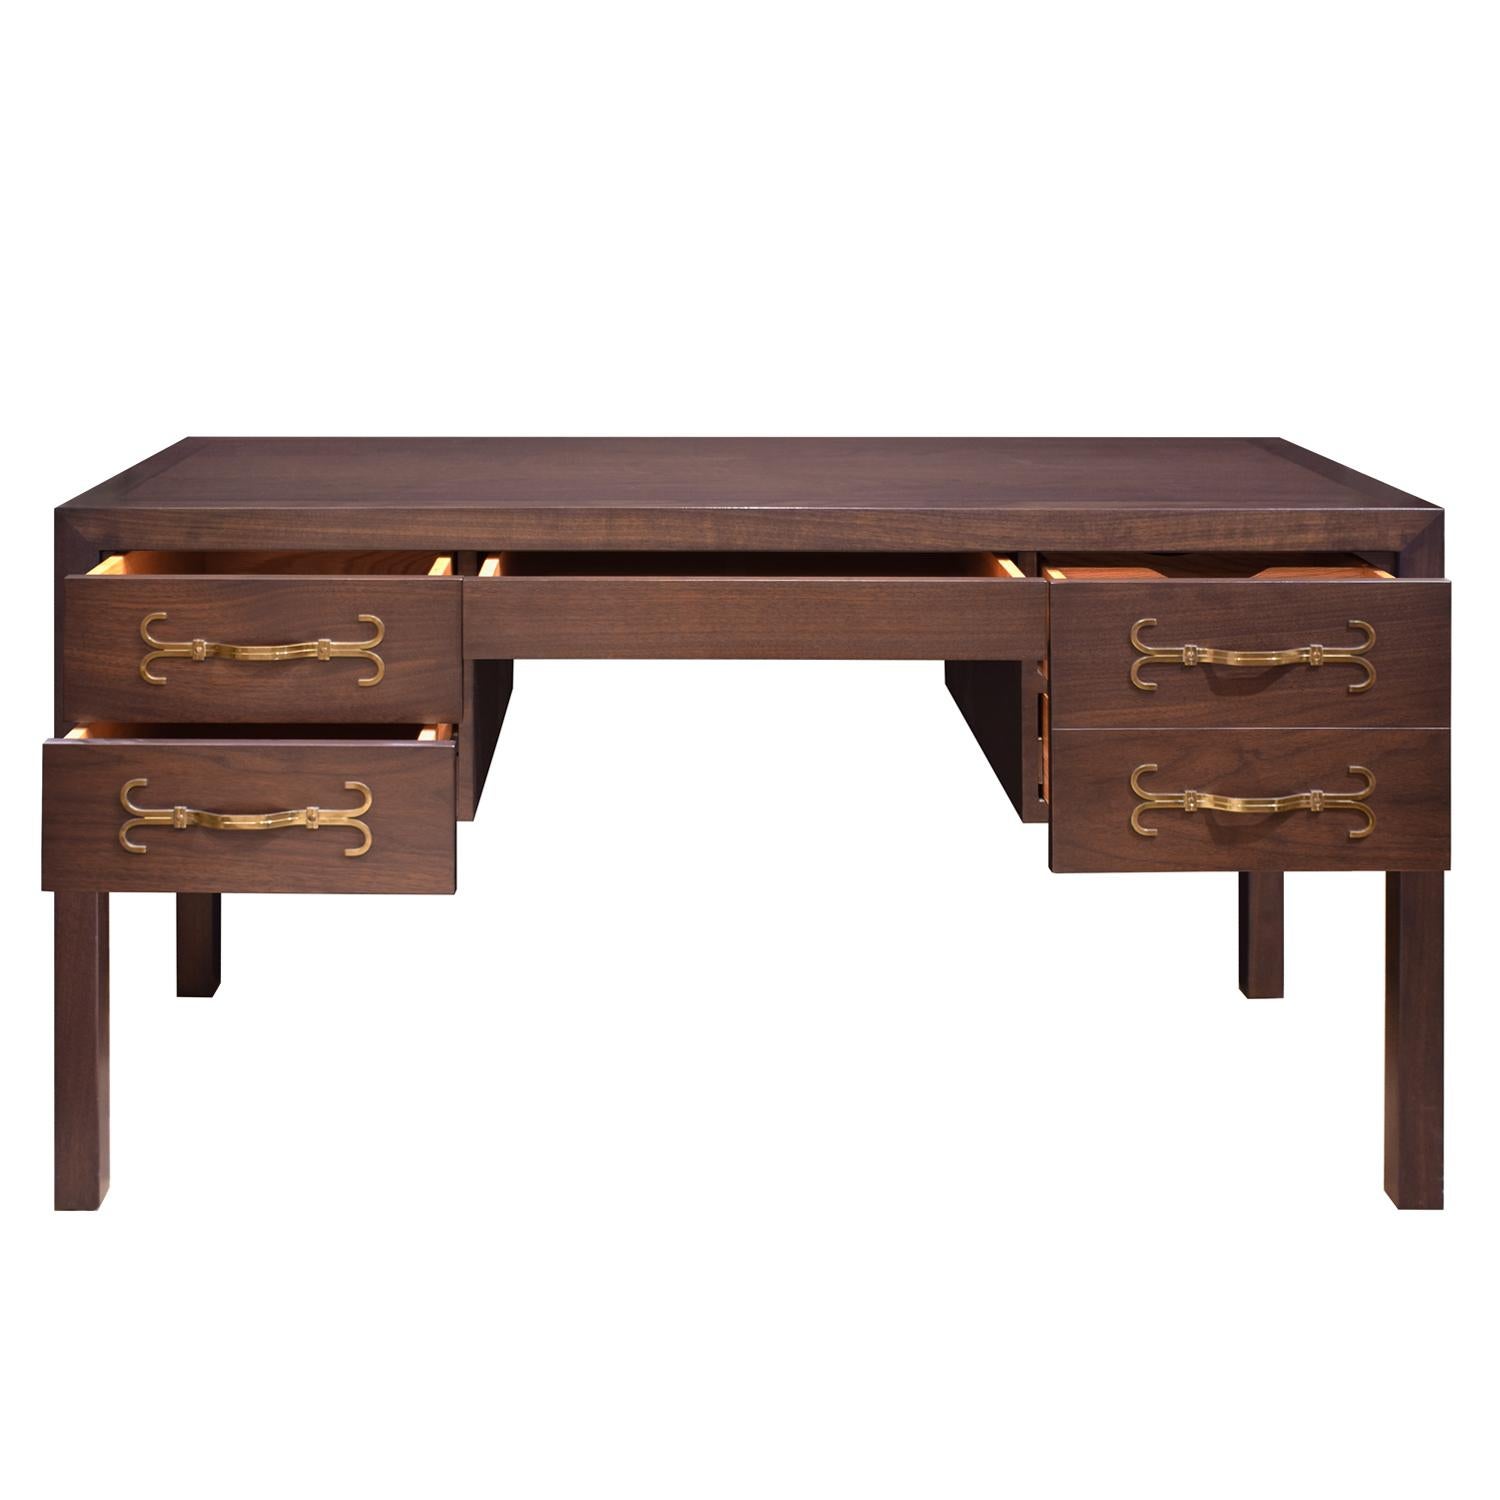 Fine desk in dark walnut with ebonized satinwood inlays on top and exquisite etched brass hardware on drawers by Tommi Parzinger for Parzinger Originals, American 1960's (branded signature in drawer reads “Parzinger Originals”) This was a custom